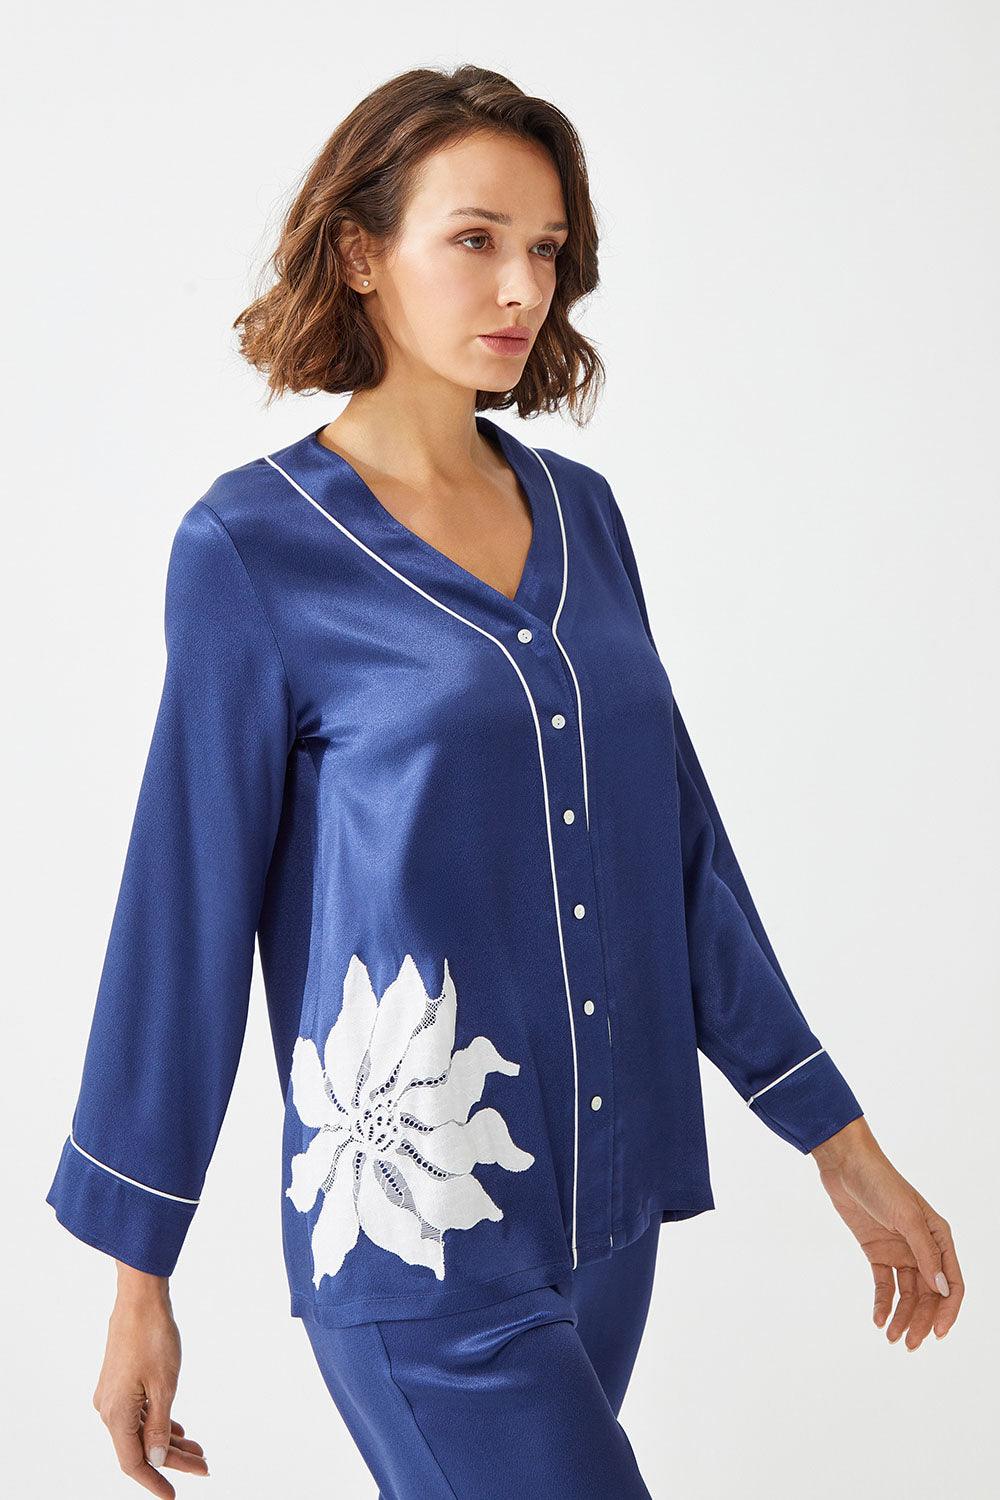 Asagoa - Trimmed Rayon and Buttoned Long Sleeve Pyjama Set - Navy Blue - Bocan